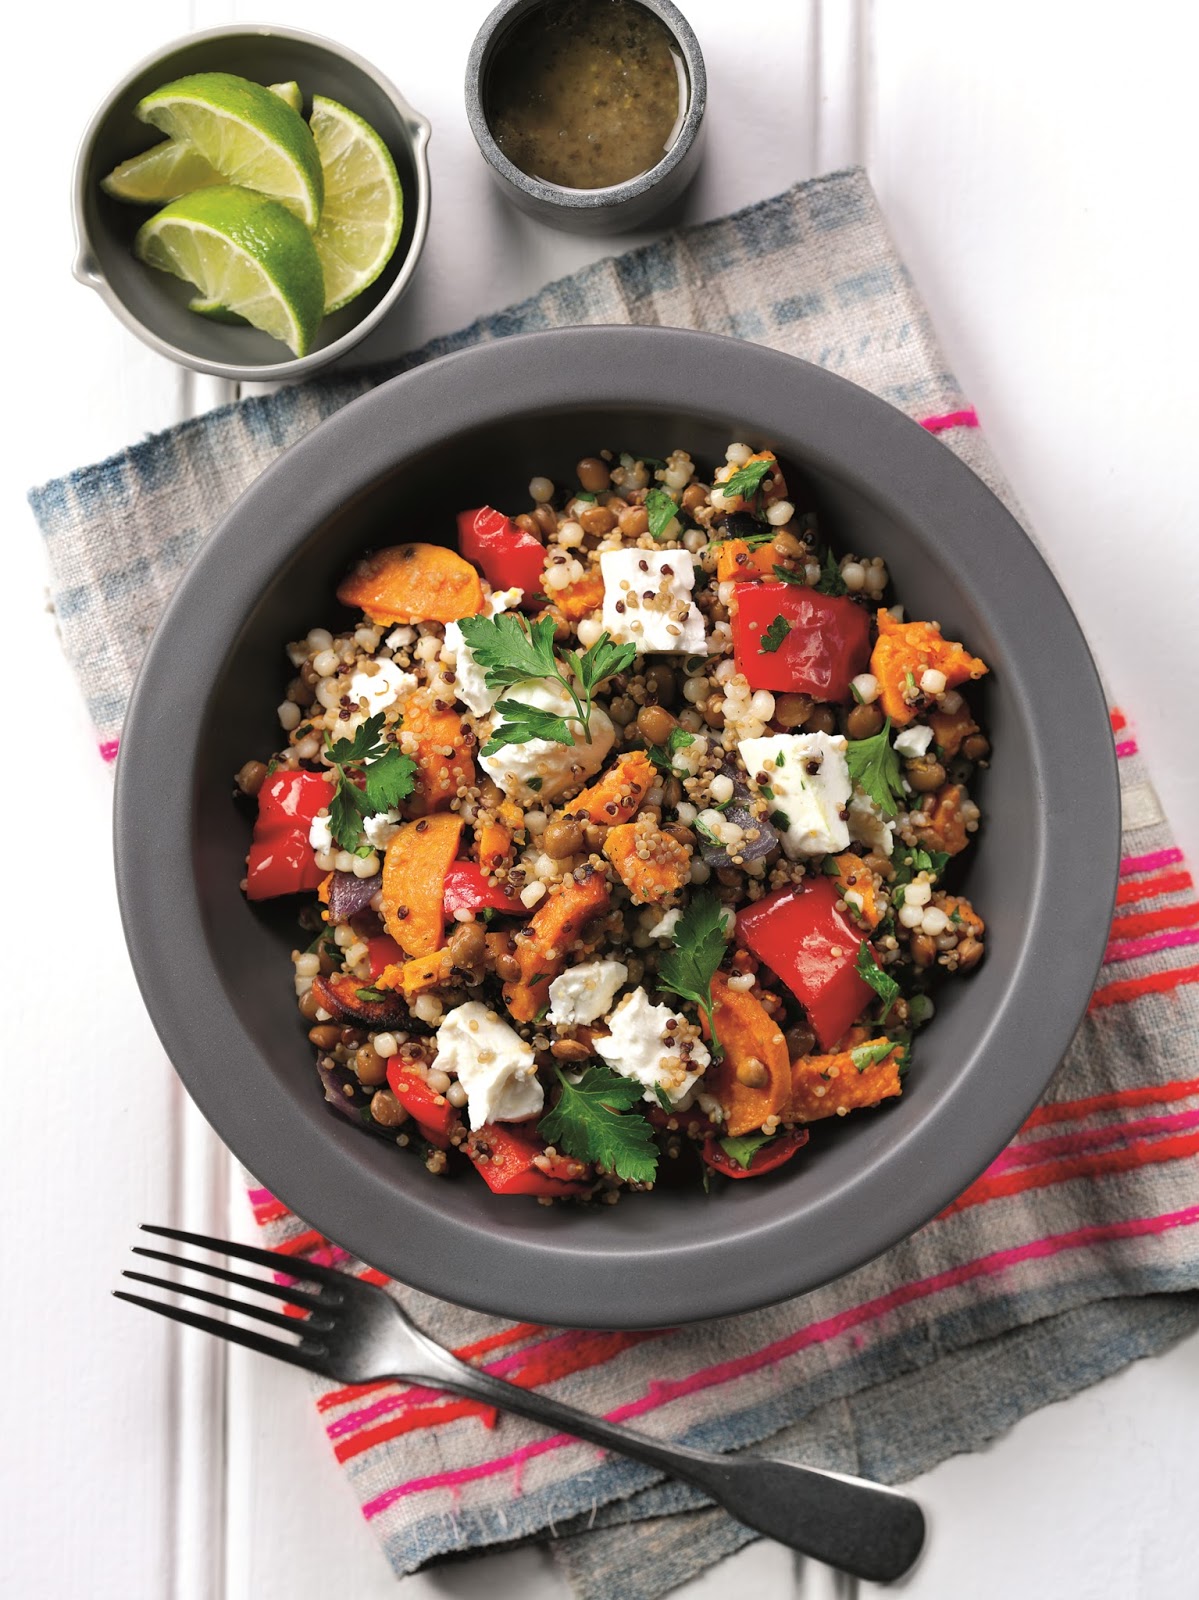 Go-with-the-grain Feta And Sweet Potato Supper